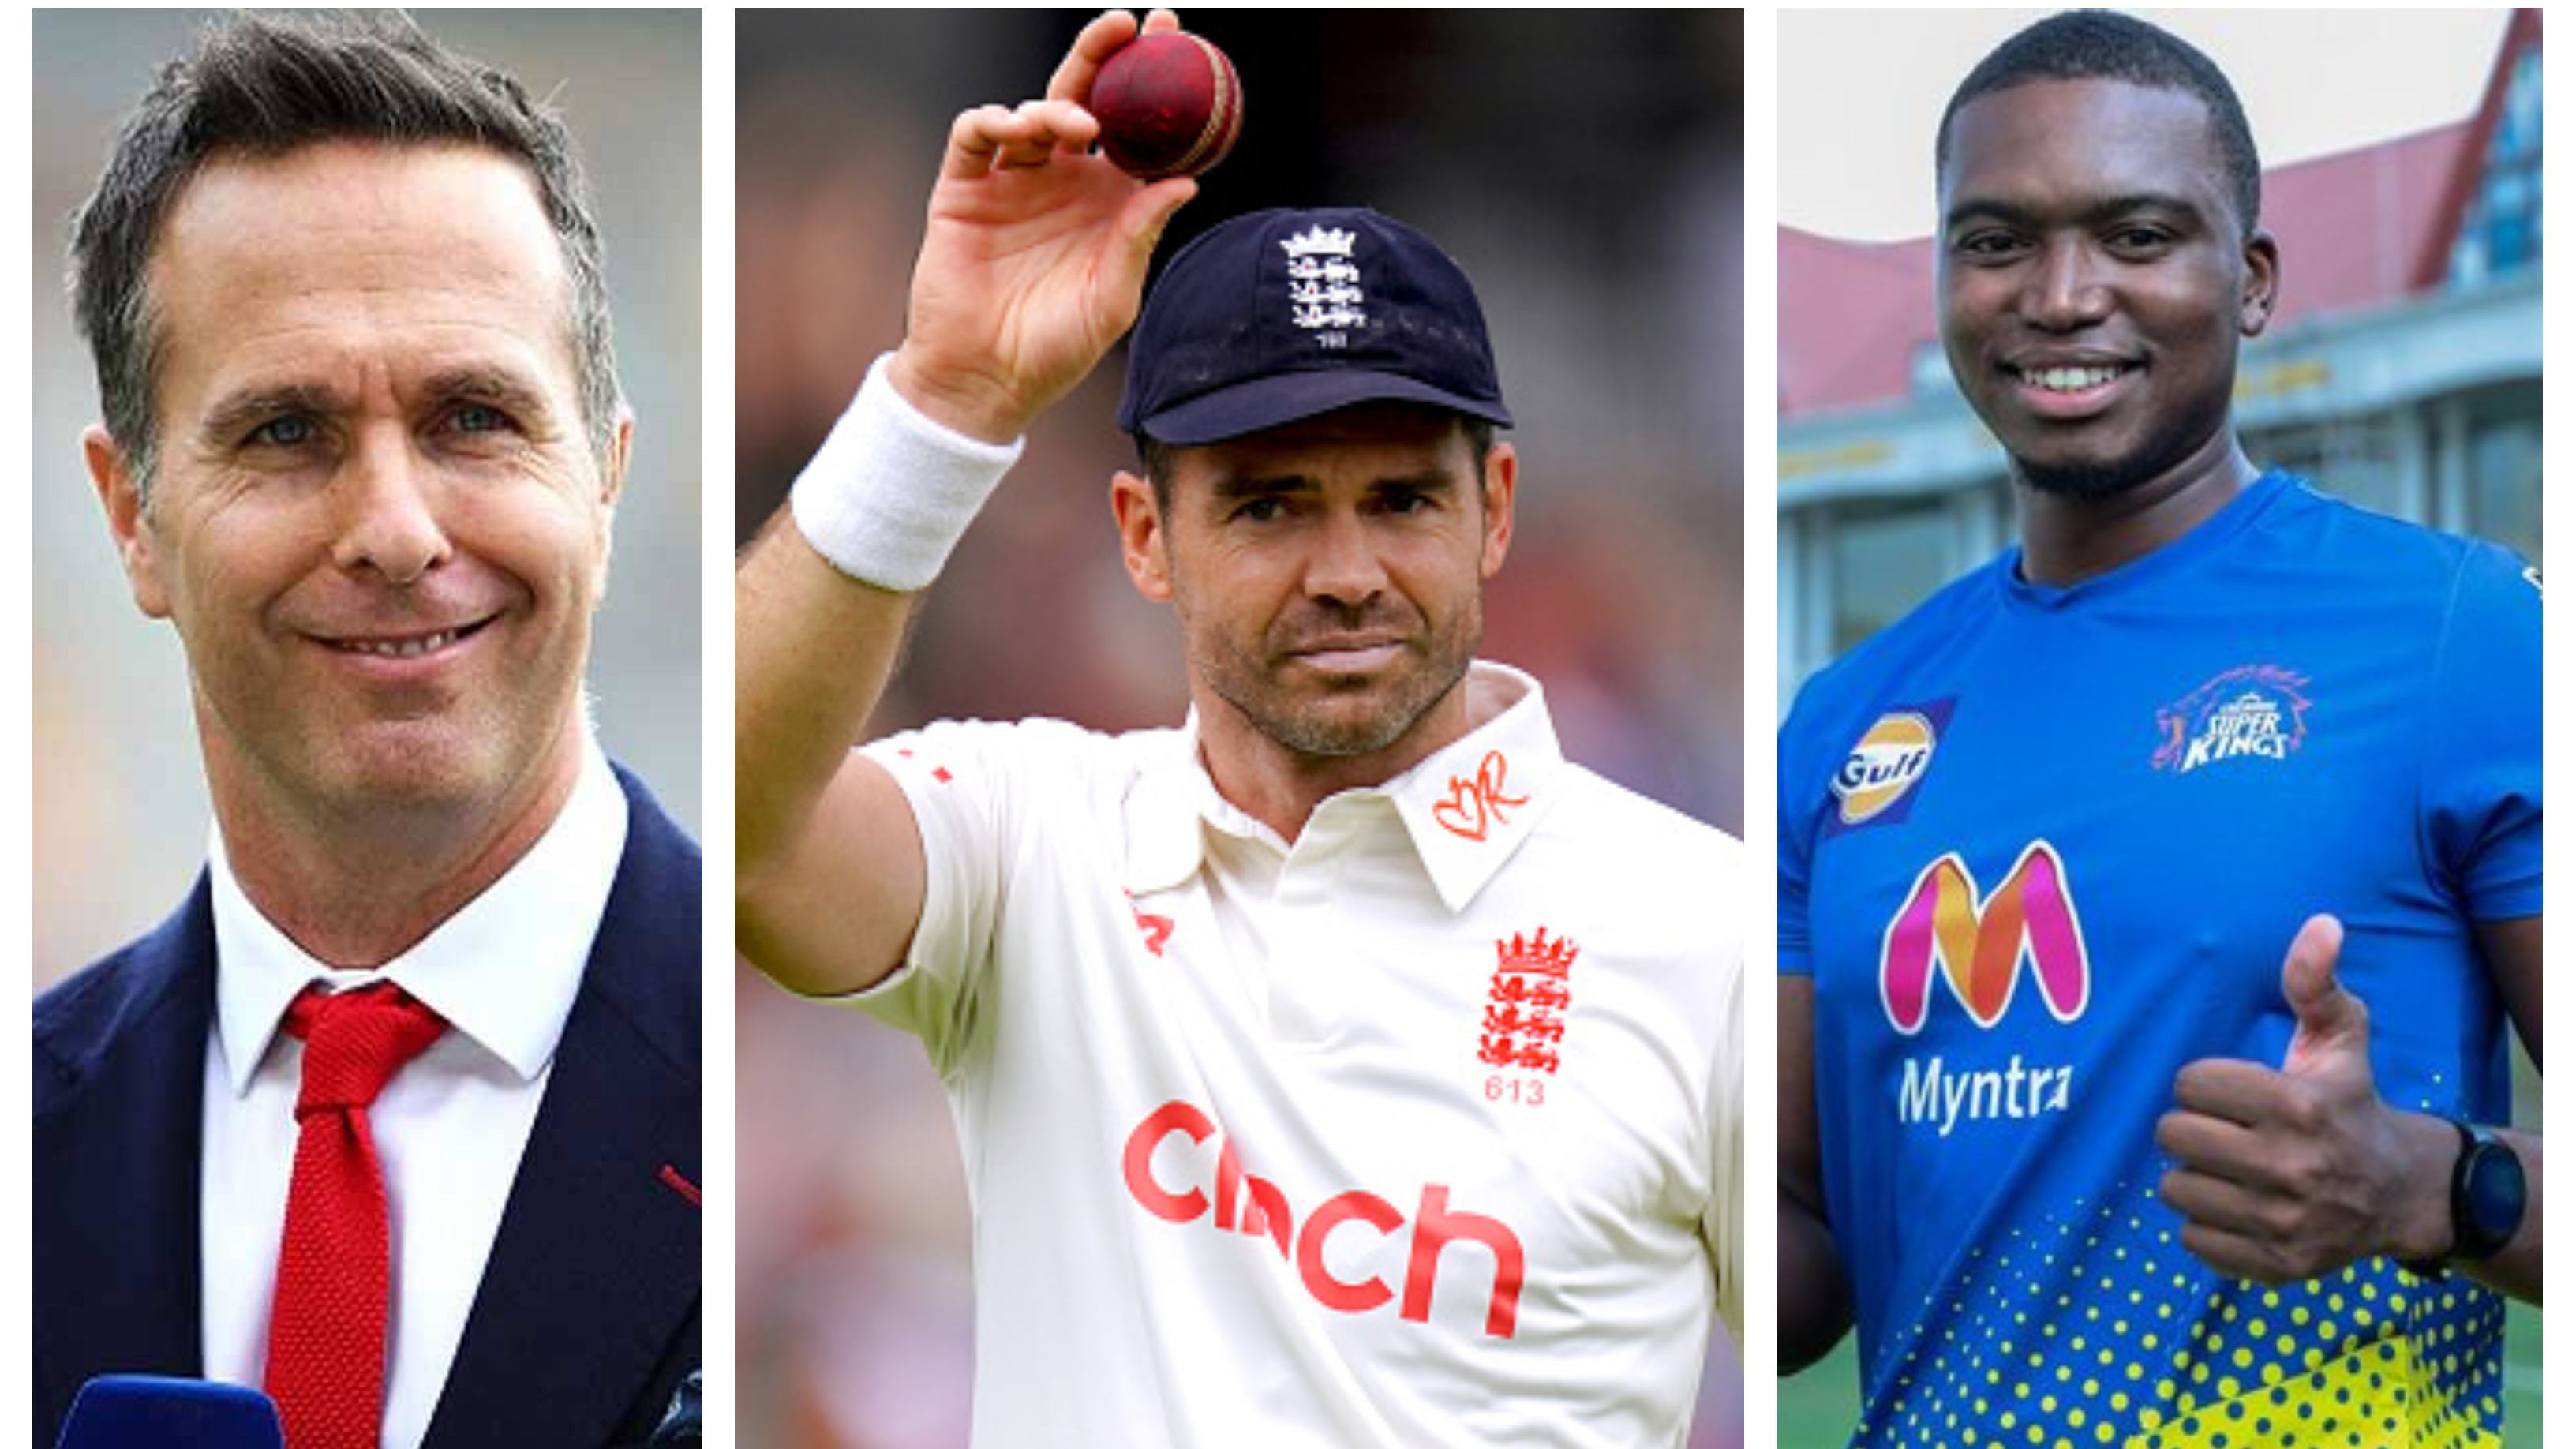 ENG v IND 2021: Cricket fraternity salutes ageless James Anderson as he takes 31st fifer to wrap Indian innings for 364